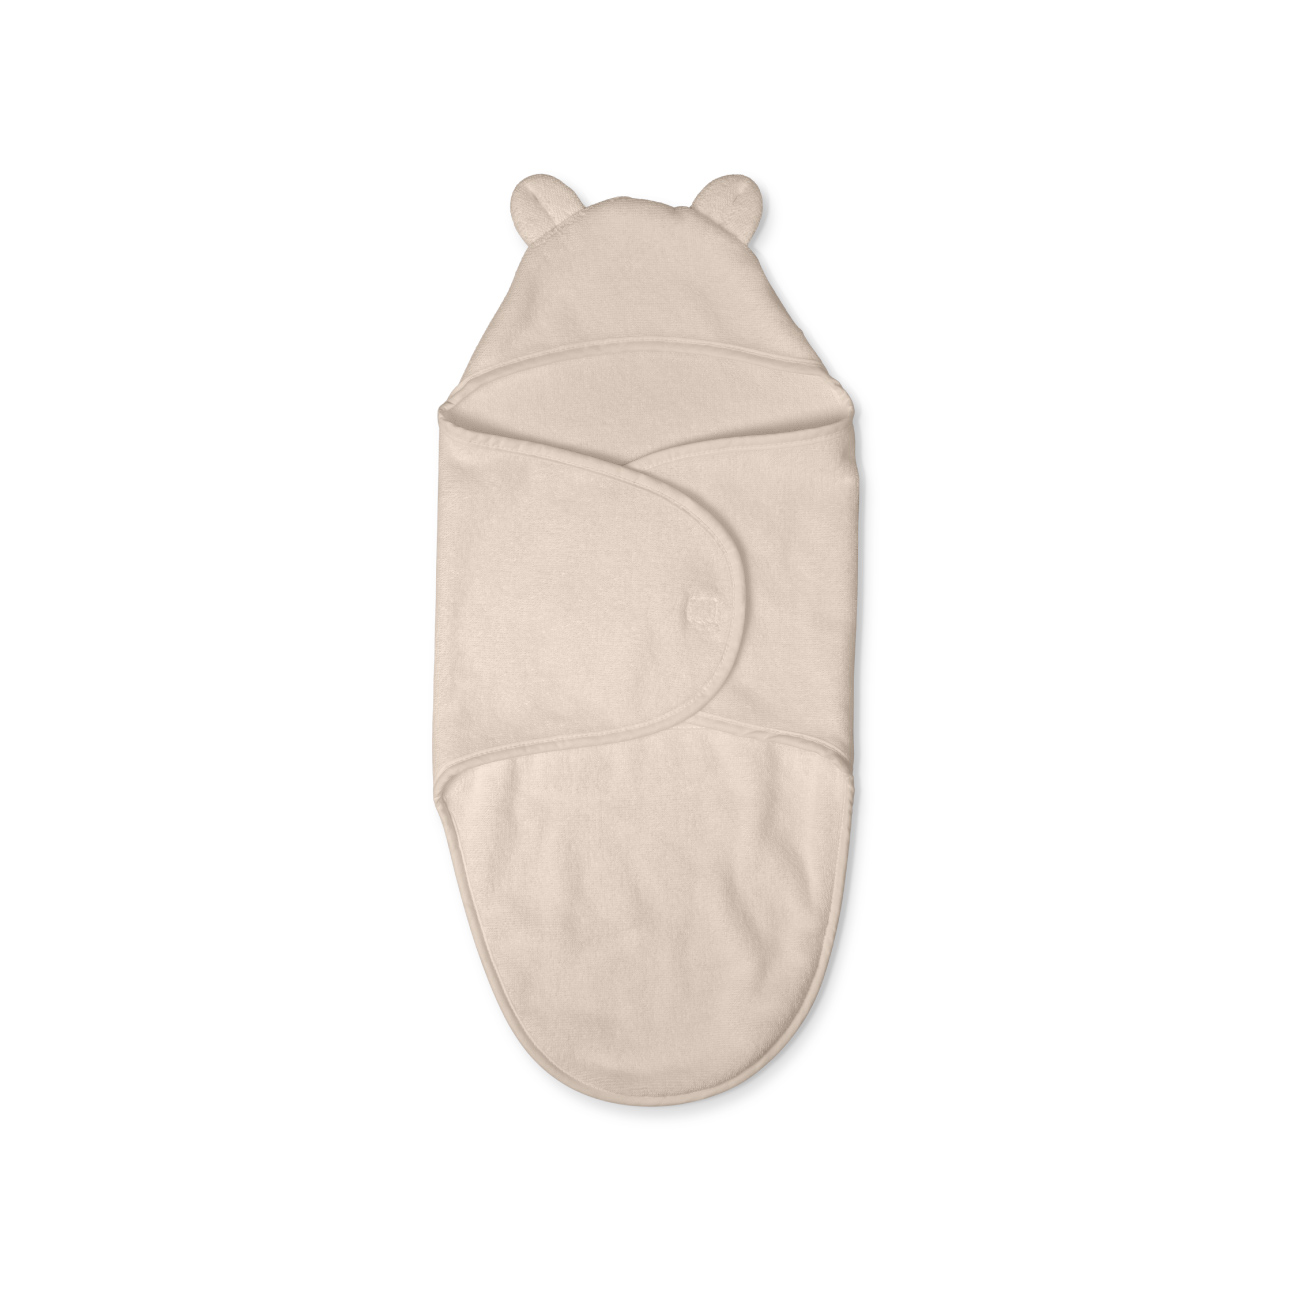 That's Mine - Towel Swaddle - Sand (HT4006)